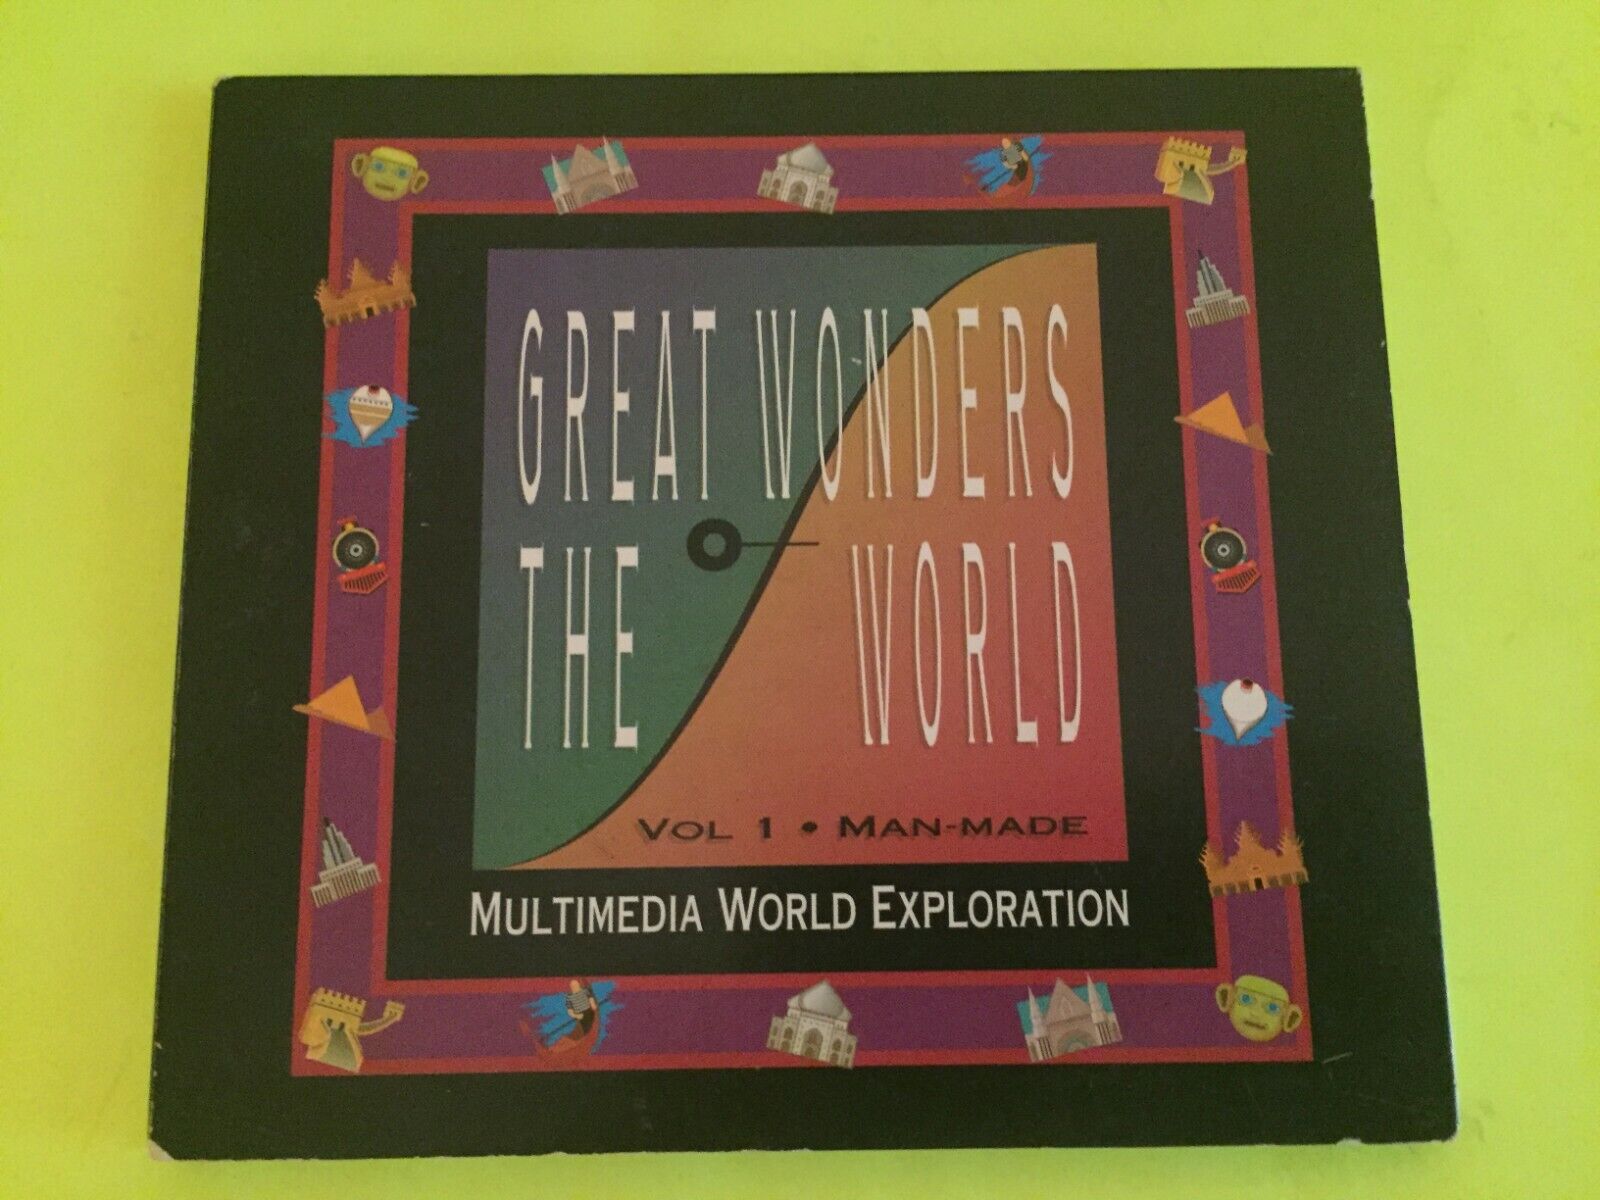 Great Wonders of the World  PC CD-ROM 1992 DOS Version Volume 1 Man Made